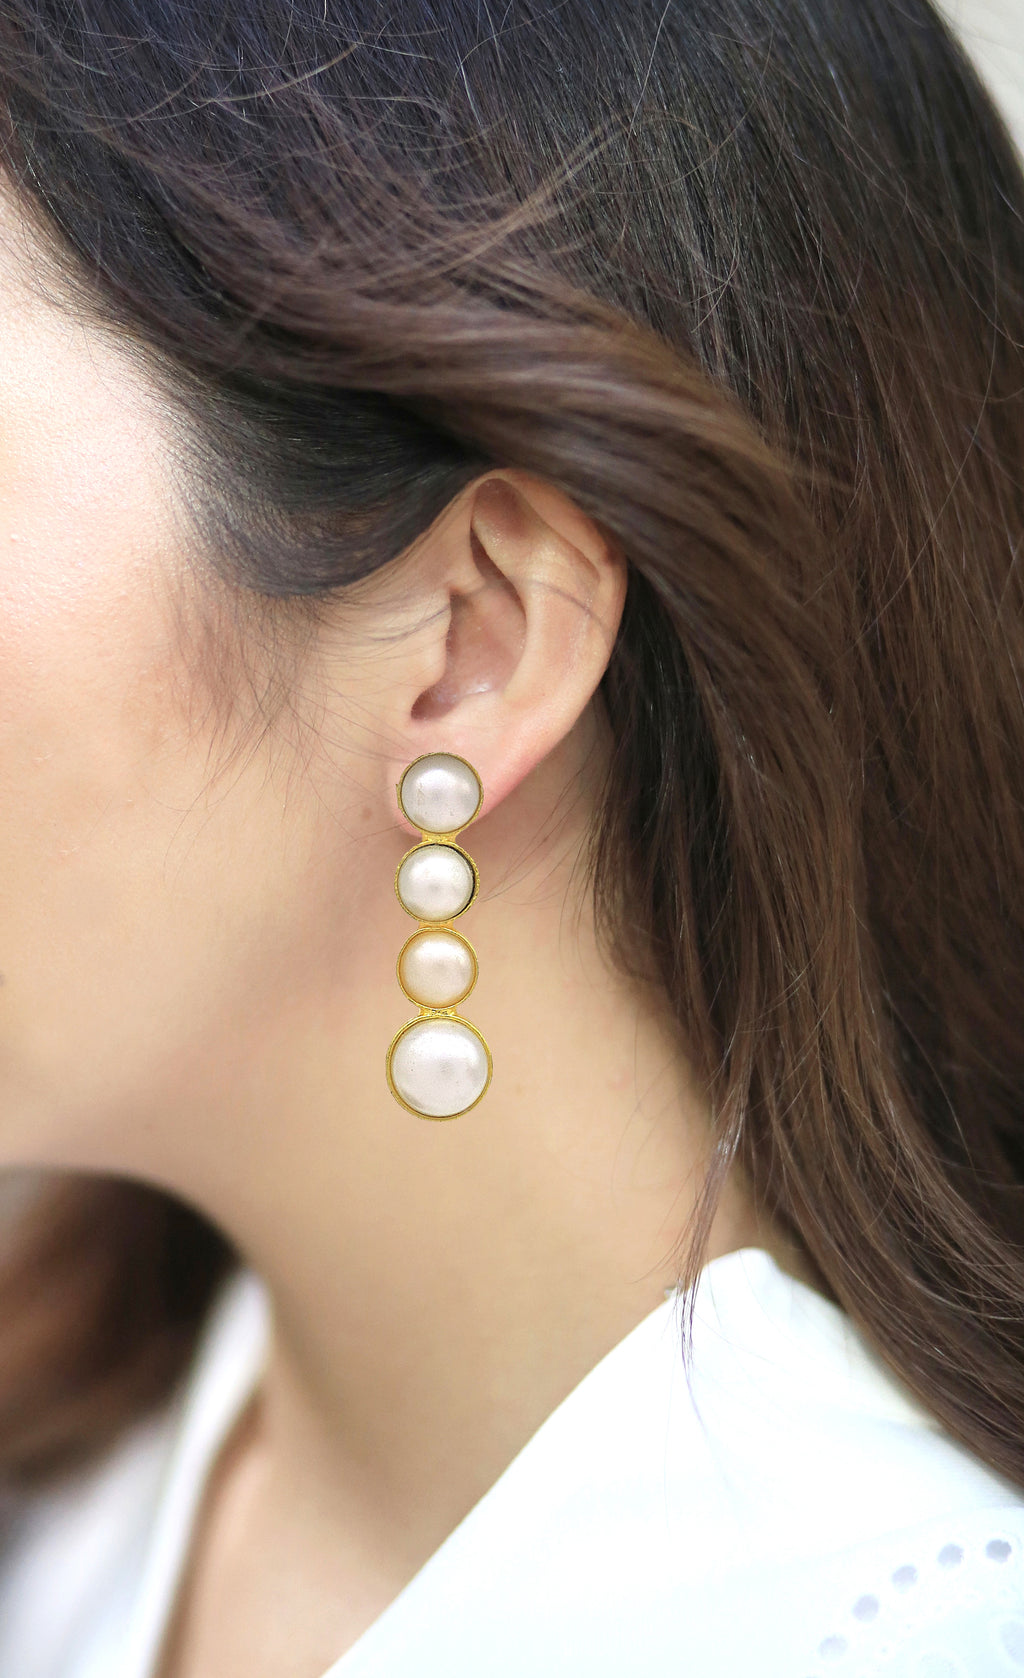 Pearl Quad Earrings - Statement Earrings - Gold-Plated & Hypoallergenic - Made in India - Dubai Jewellery - Dori